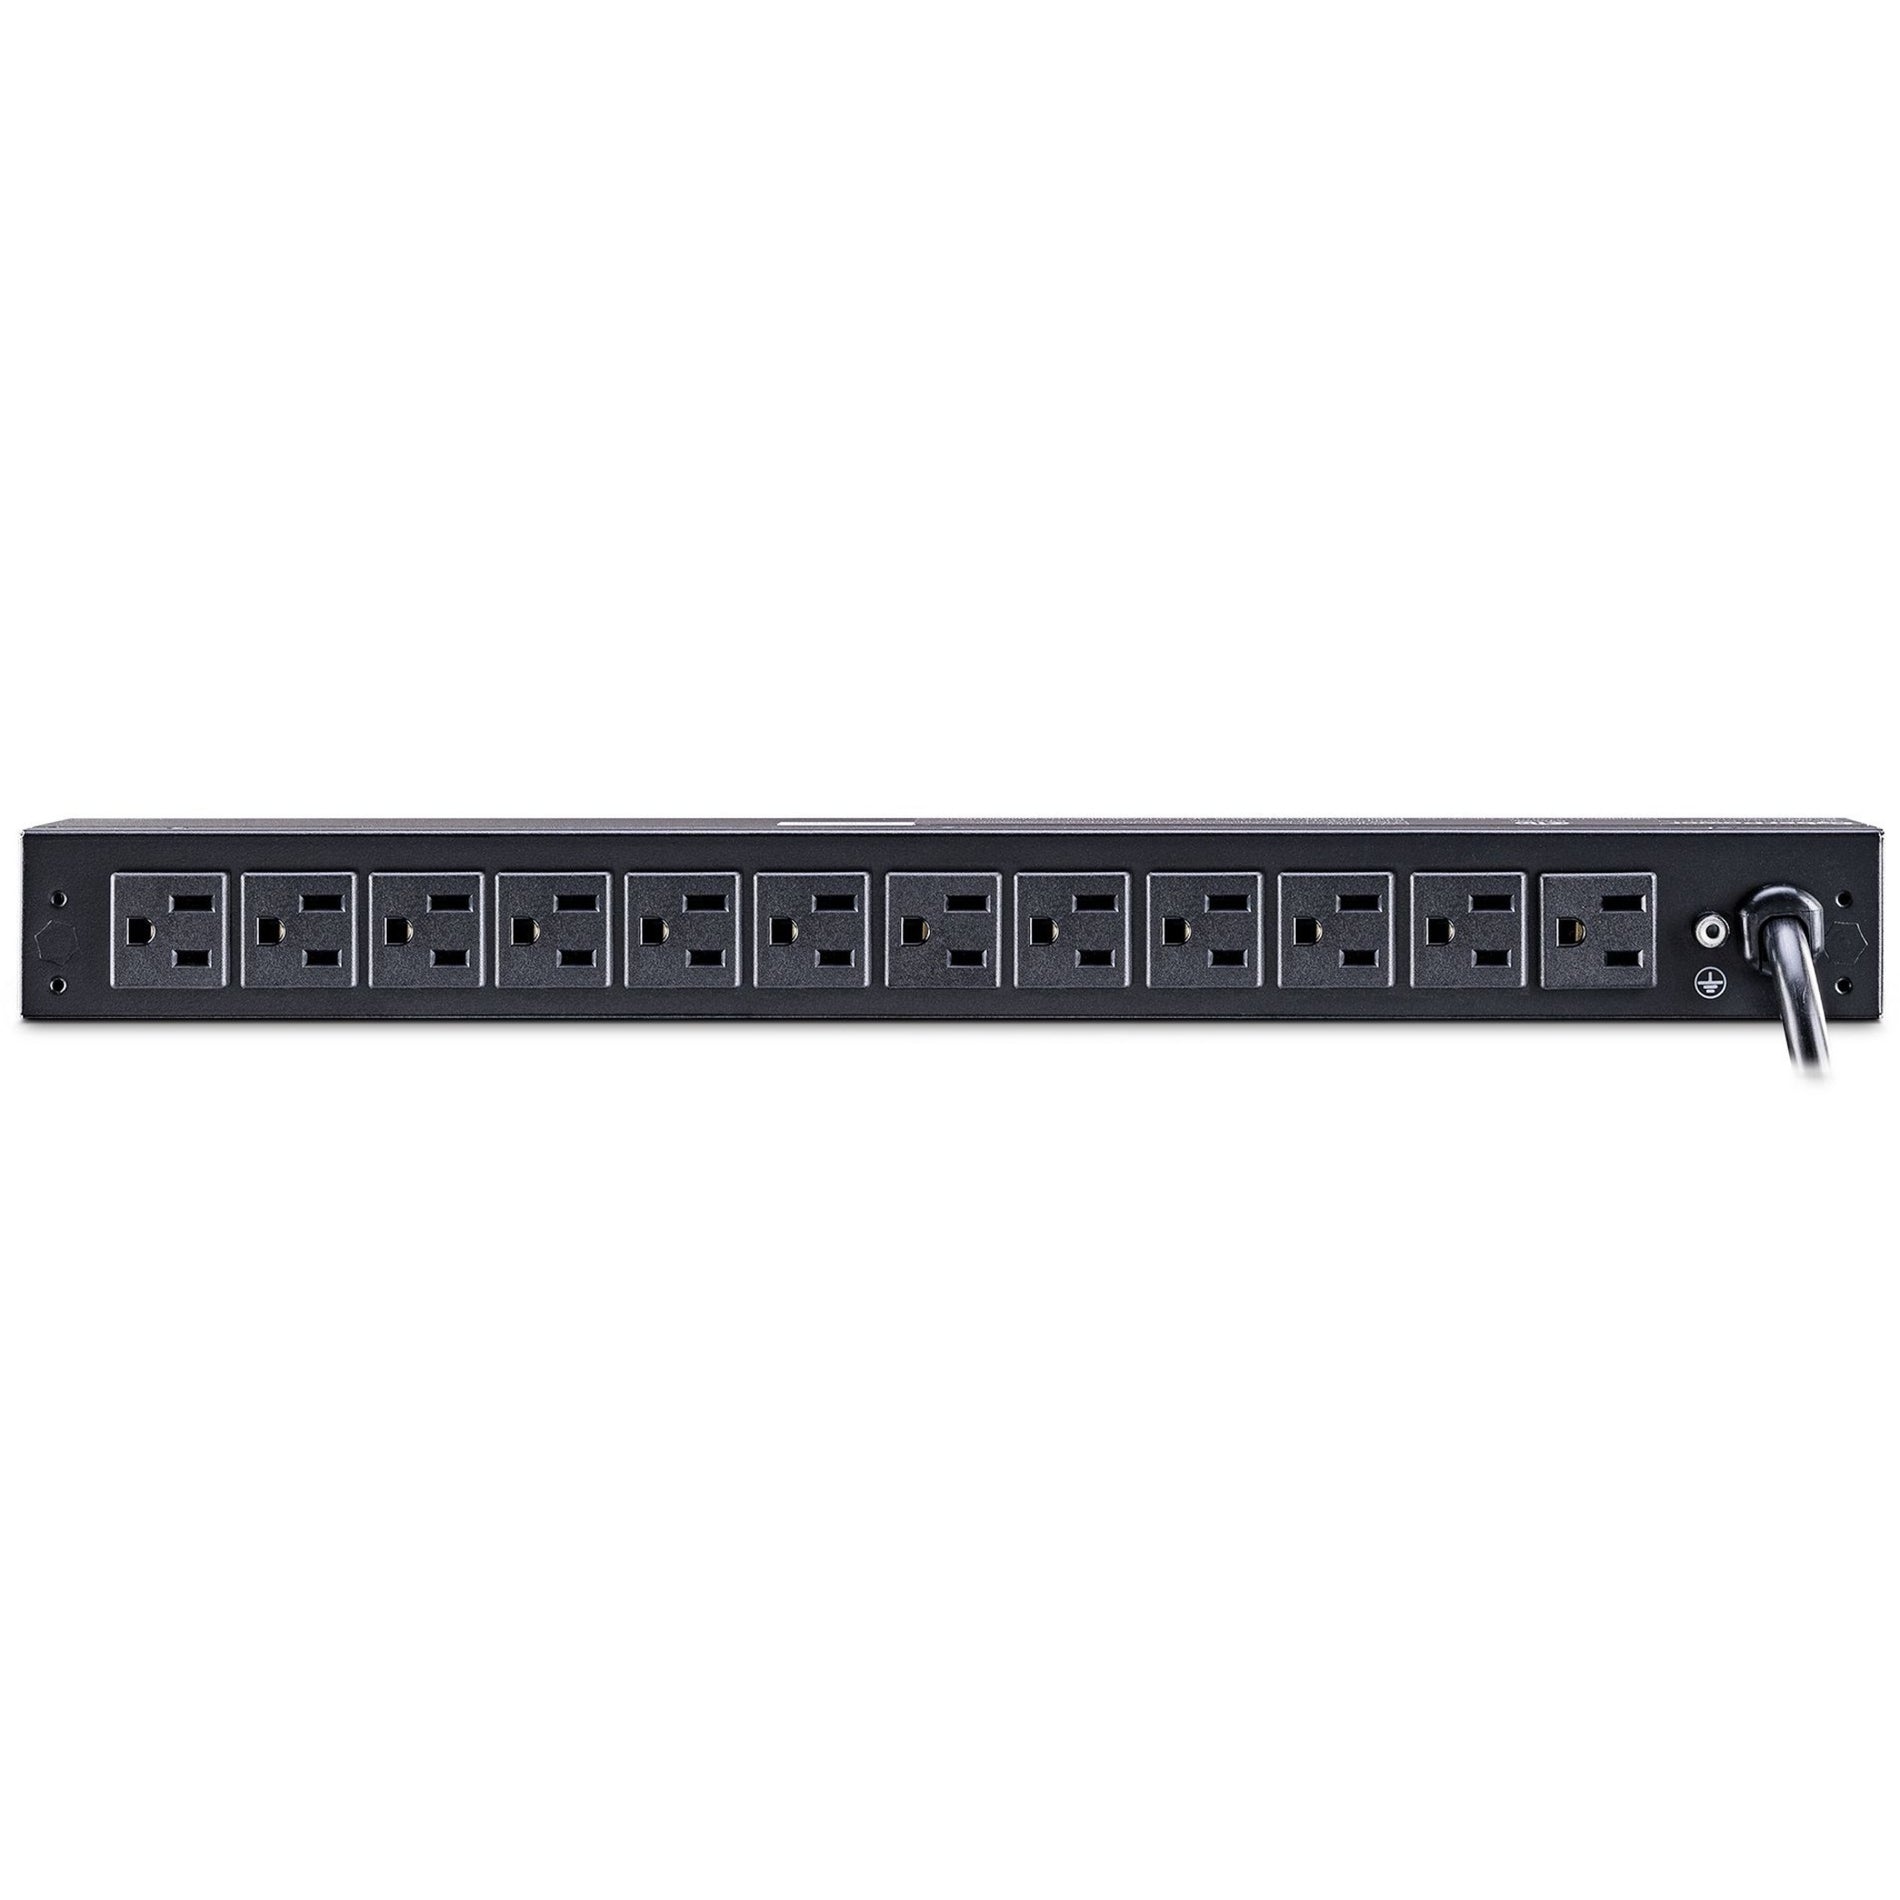 CyberPower PDU15M2F12R 14-Outlets PDU 100-125VAC 15A Metered Power Distribution Unit